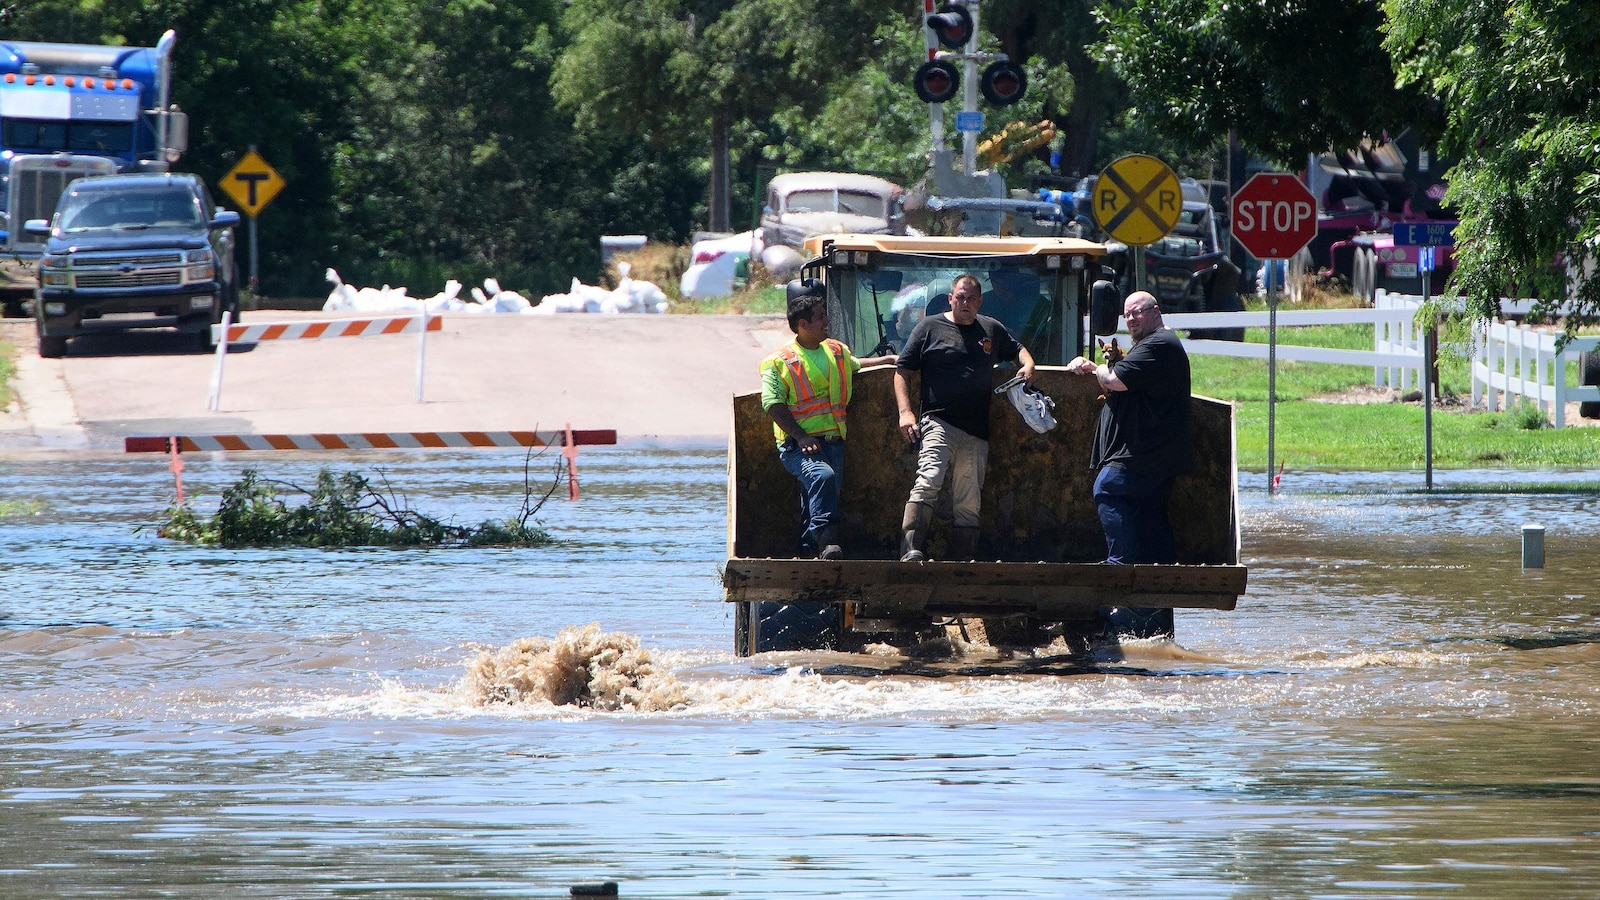 Rescue Operation Underway as Helicopters Assist Flooded Iowa Town